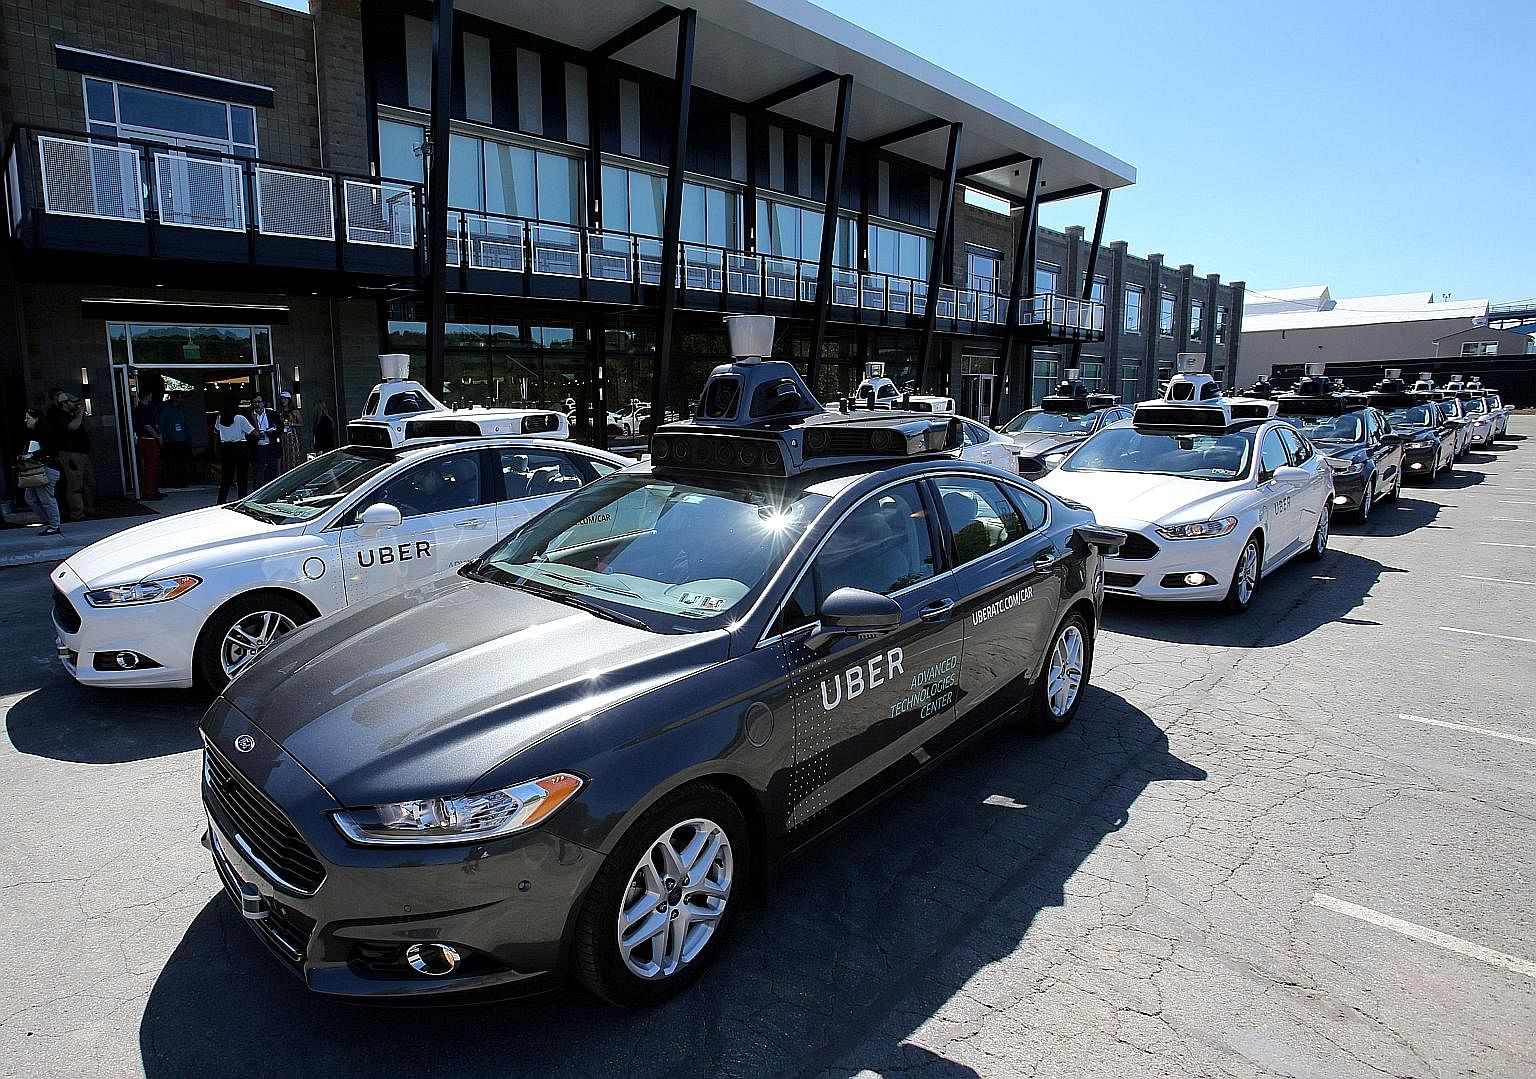 Uber's Ford Fusion self-driving cars at a demonstration event in Pittsburgh, Pennsylvania, last year. The transport tech company has reportedly agreed to partner General Motors' Cruise division on driverless technology.